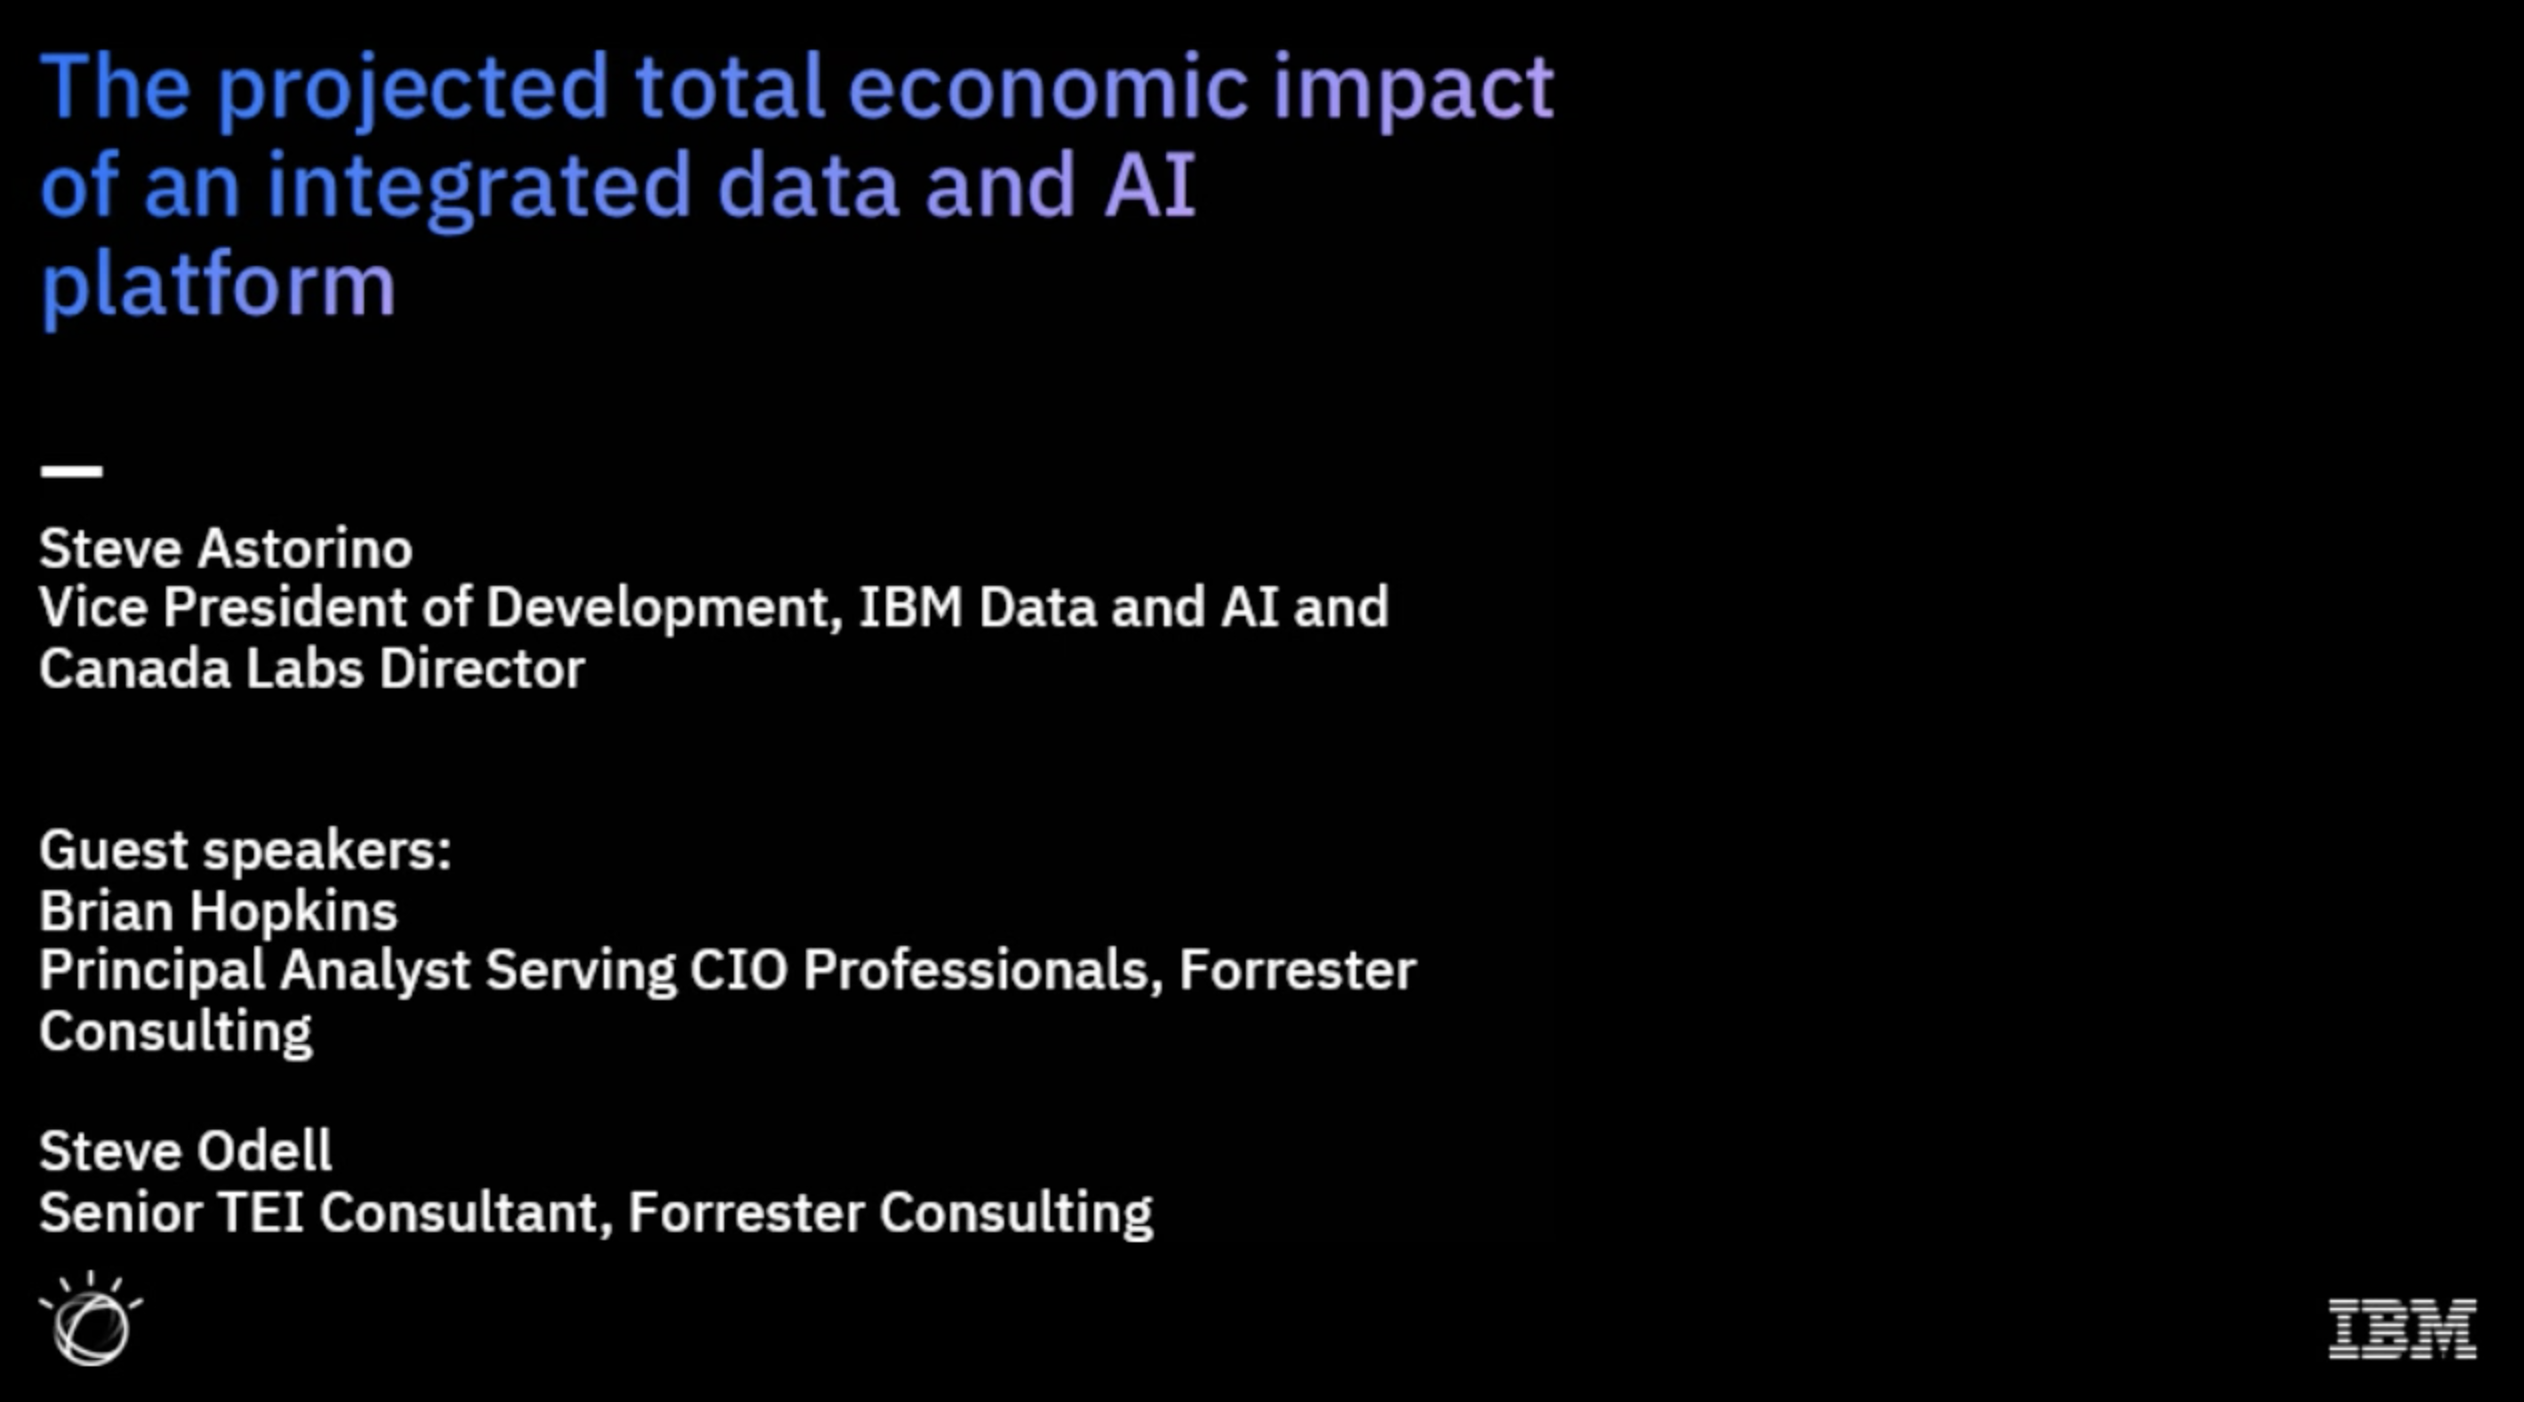 Screenshot 2020 10 20 at 16.07.09 - Forrester TEI Webinar - The projected total impact of an integrated data and AI platform